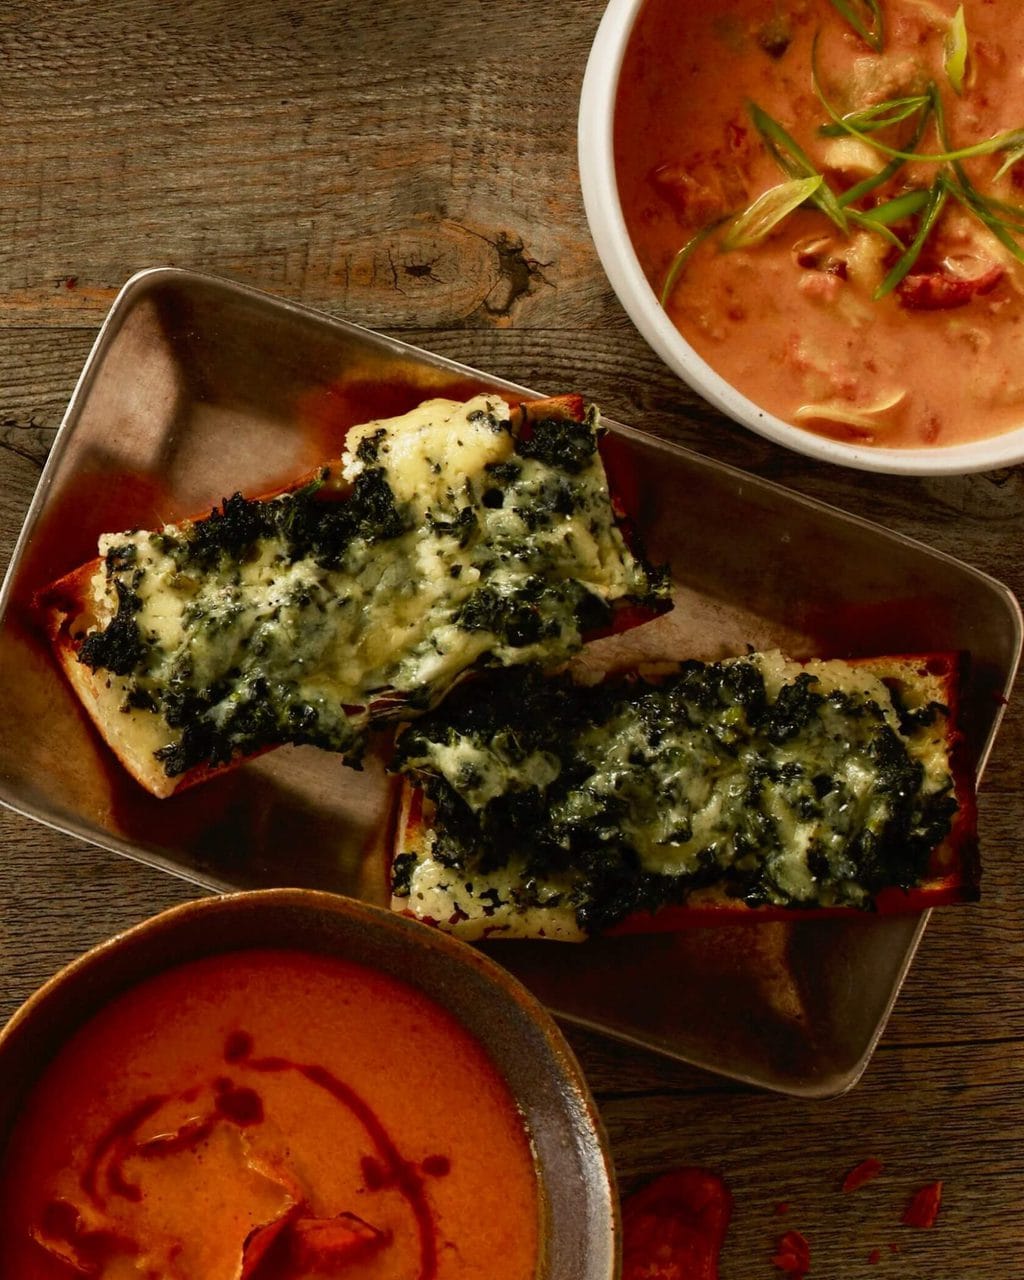 open faced spinach melts with cheese and spinach melted on french bread